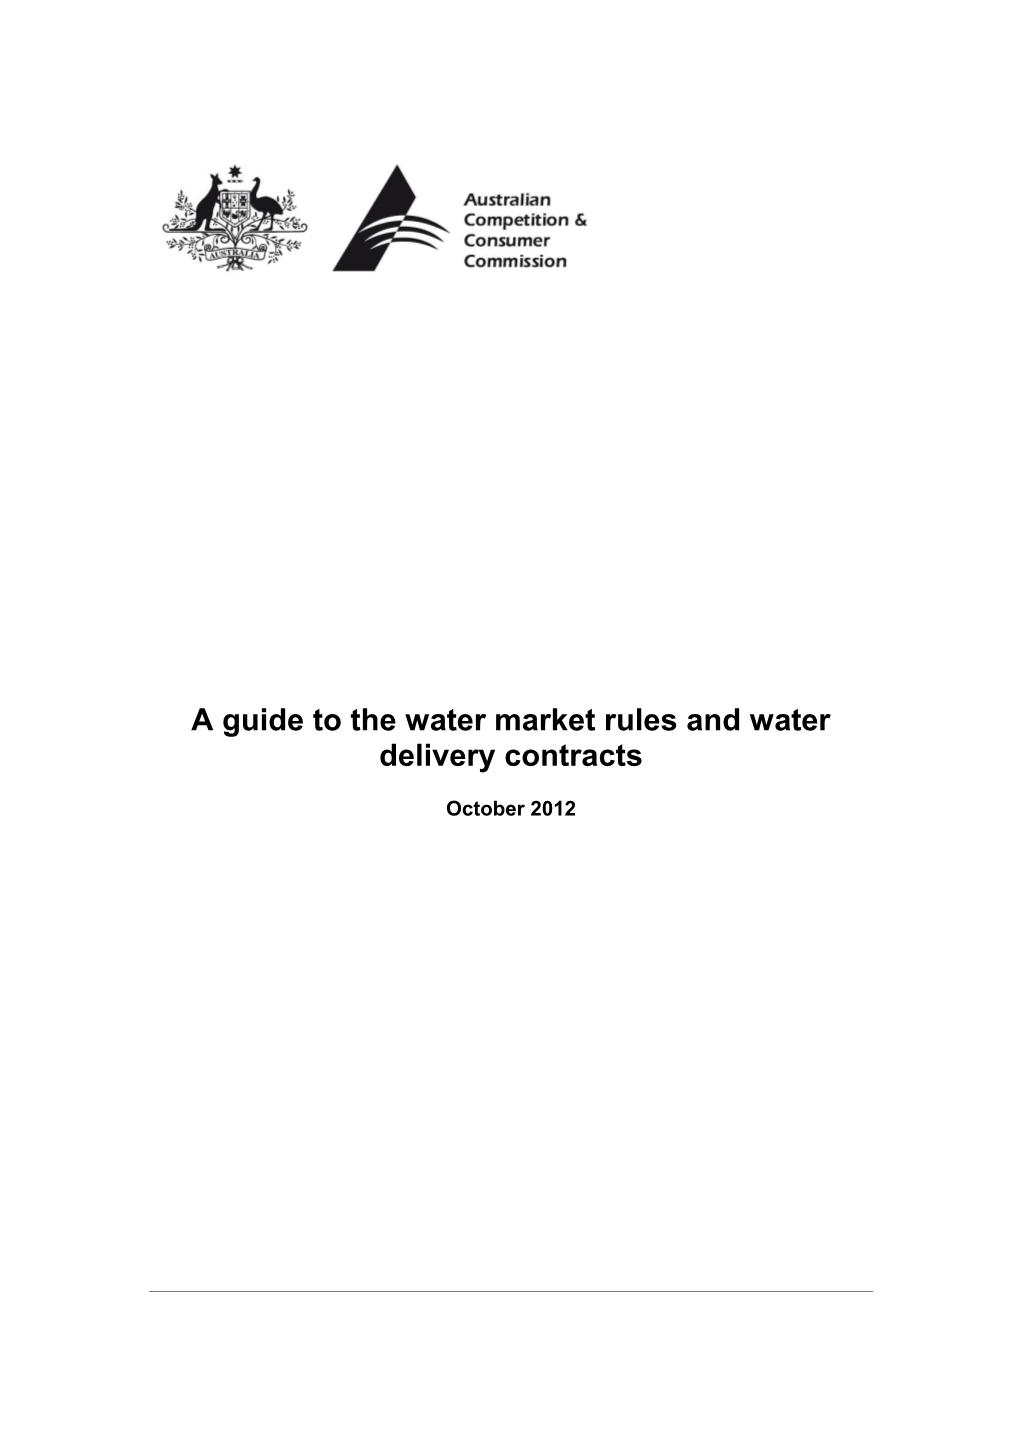 A Guide to the Water Market Rules and Water Delivery Contracts